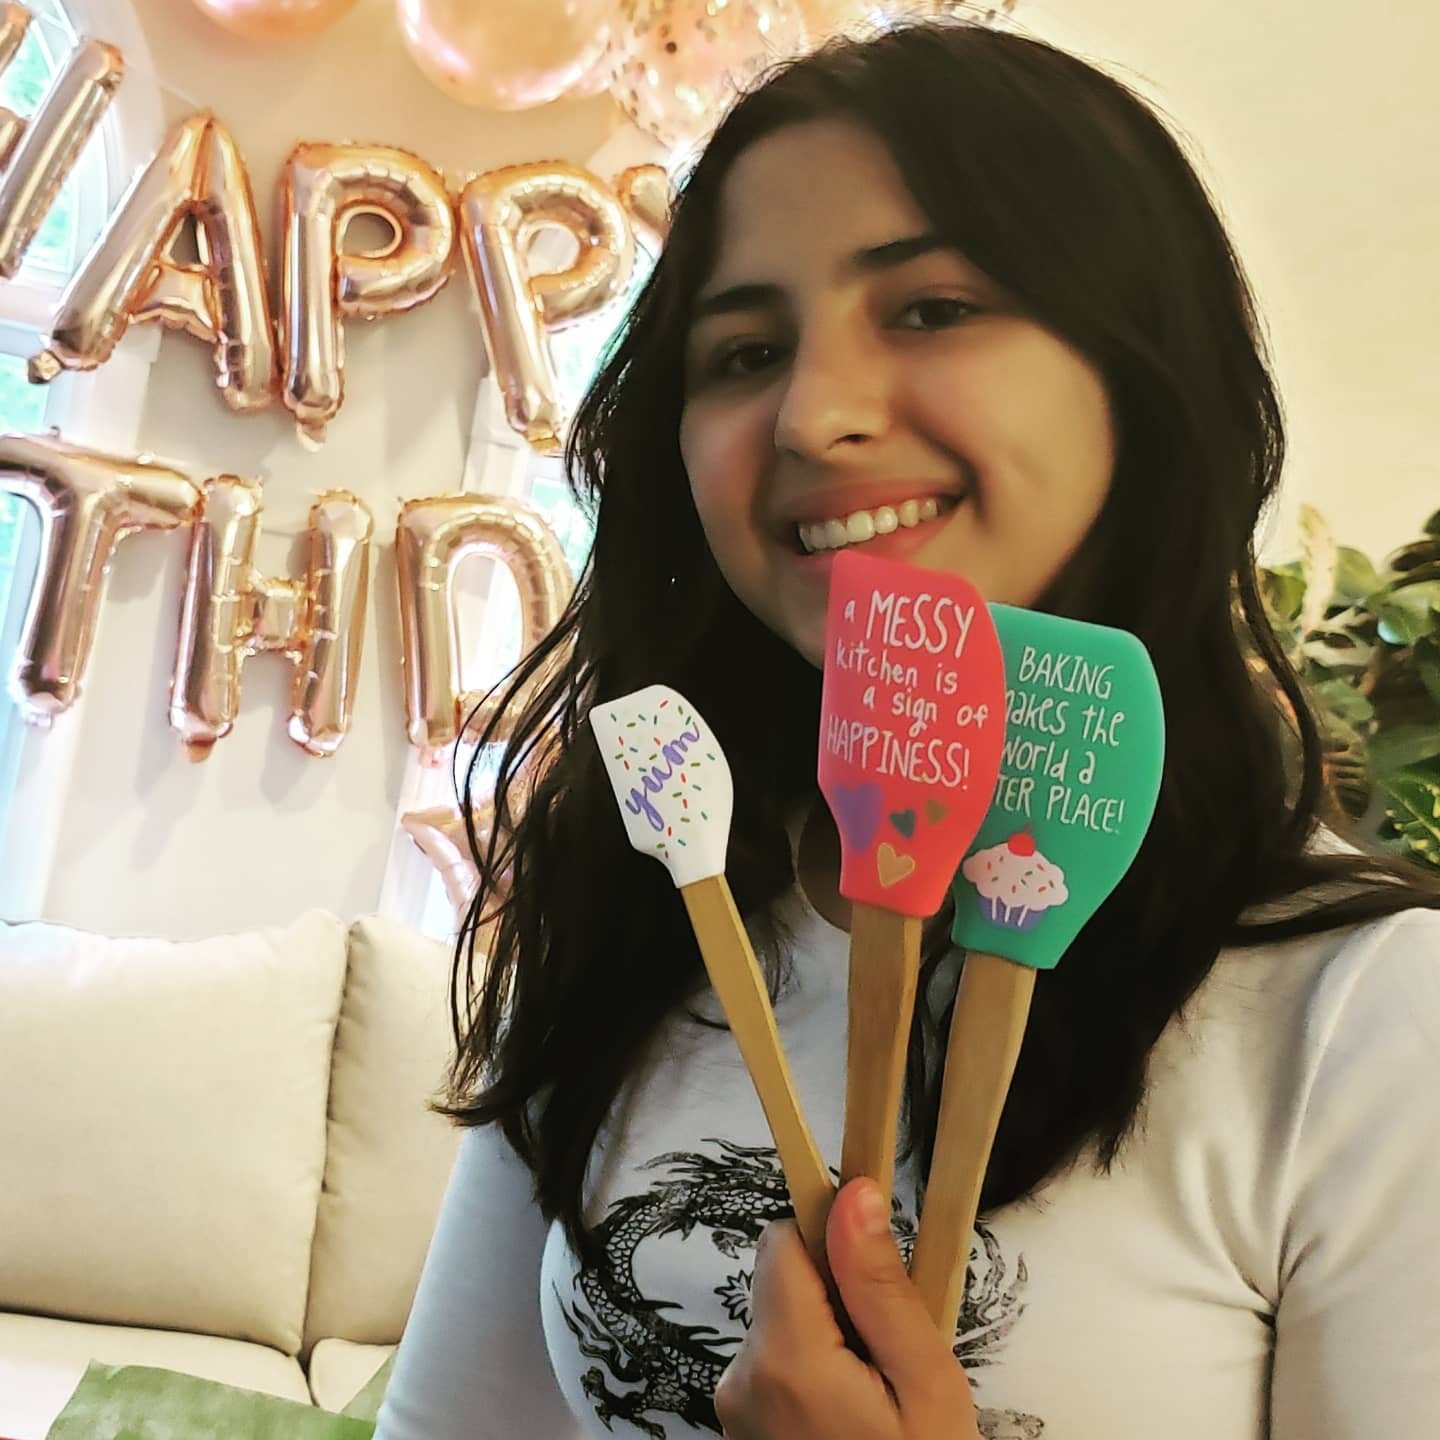 Thanks to the awasome person who sent me these cute spatulas for my birthday (I didn't have the name). They will be use to bake smiles for sure!! I love them 💗💗💗